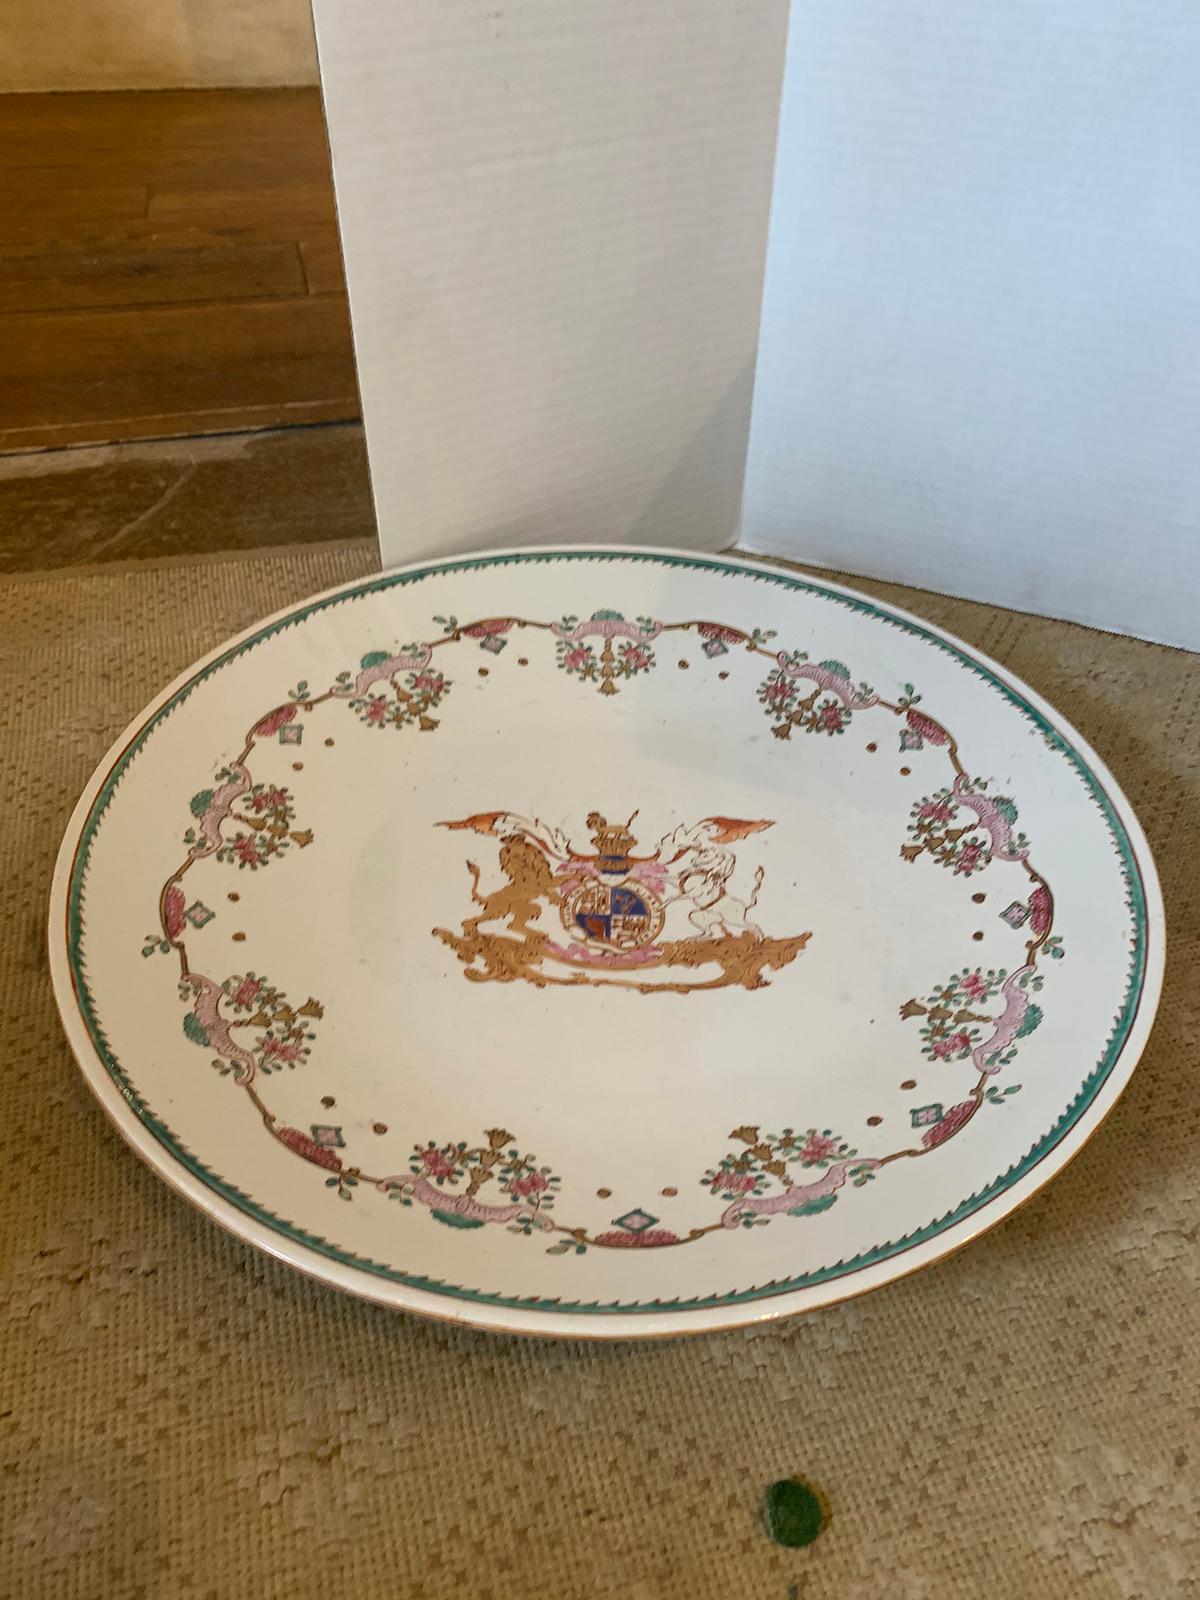 19th Century English Armorial Porcelain Charger with Crest of Royal Coat of Arms In Good Condition For Sale In Atlanta, GA